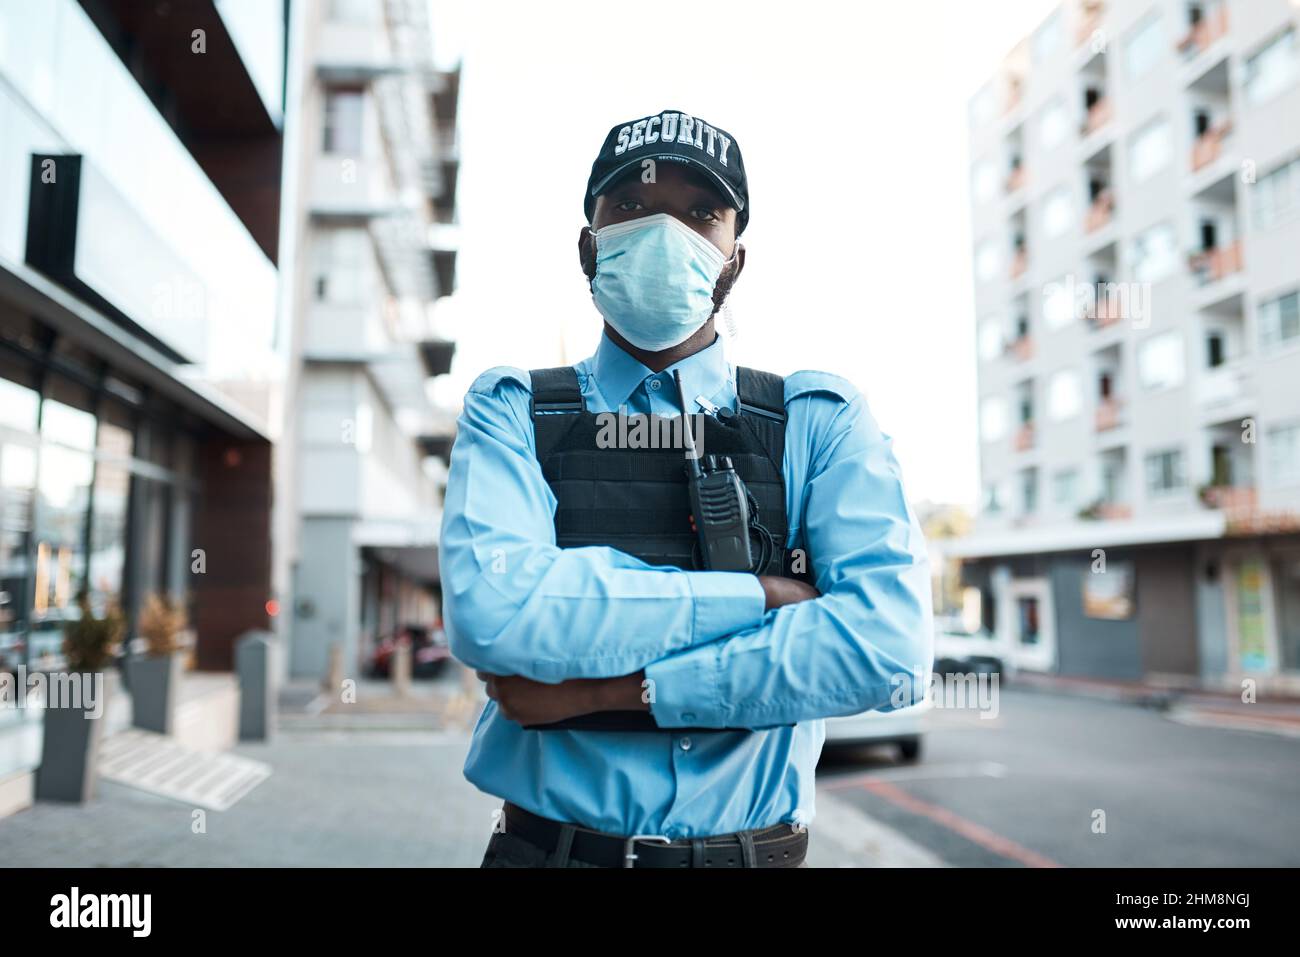 I put the pro in protect. Portrait of a confident masked young security guard standing guard outdoors. Stock Photo